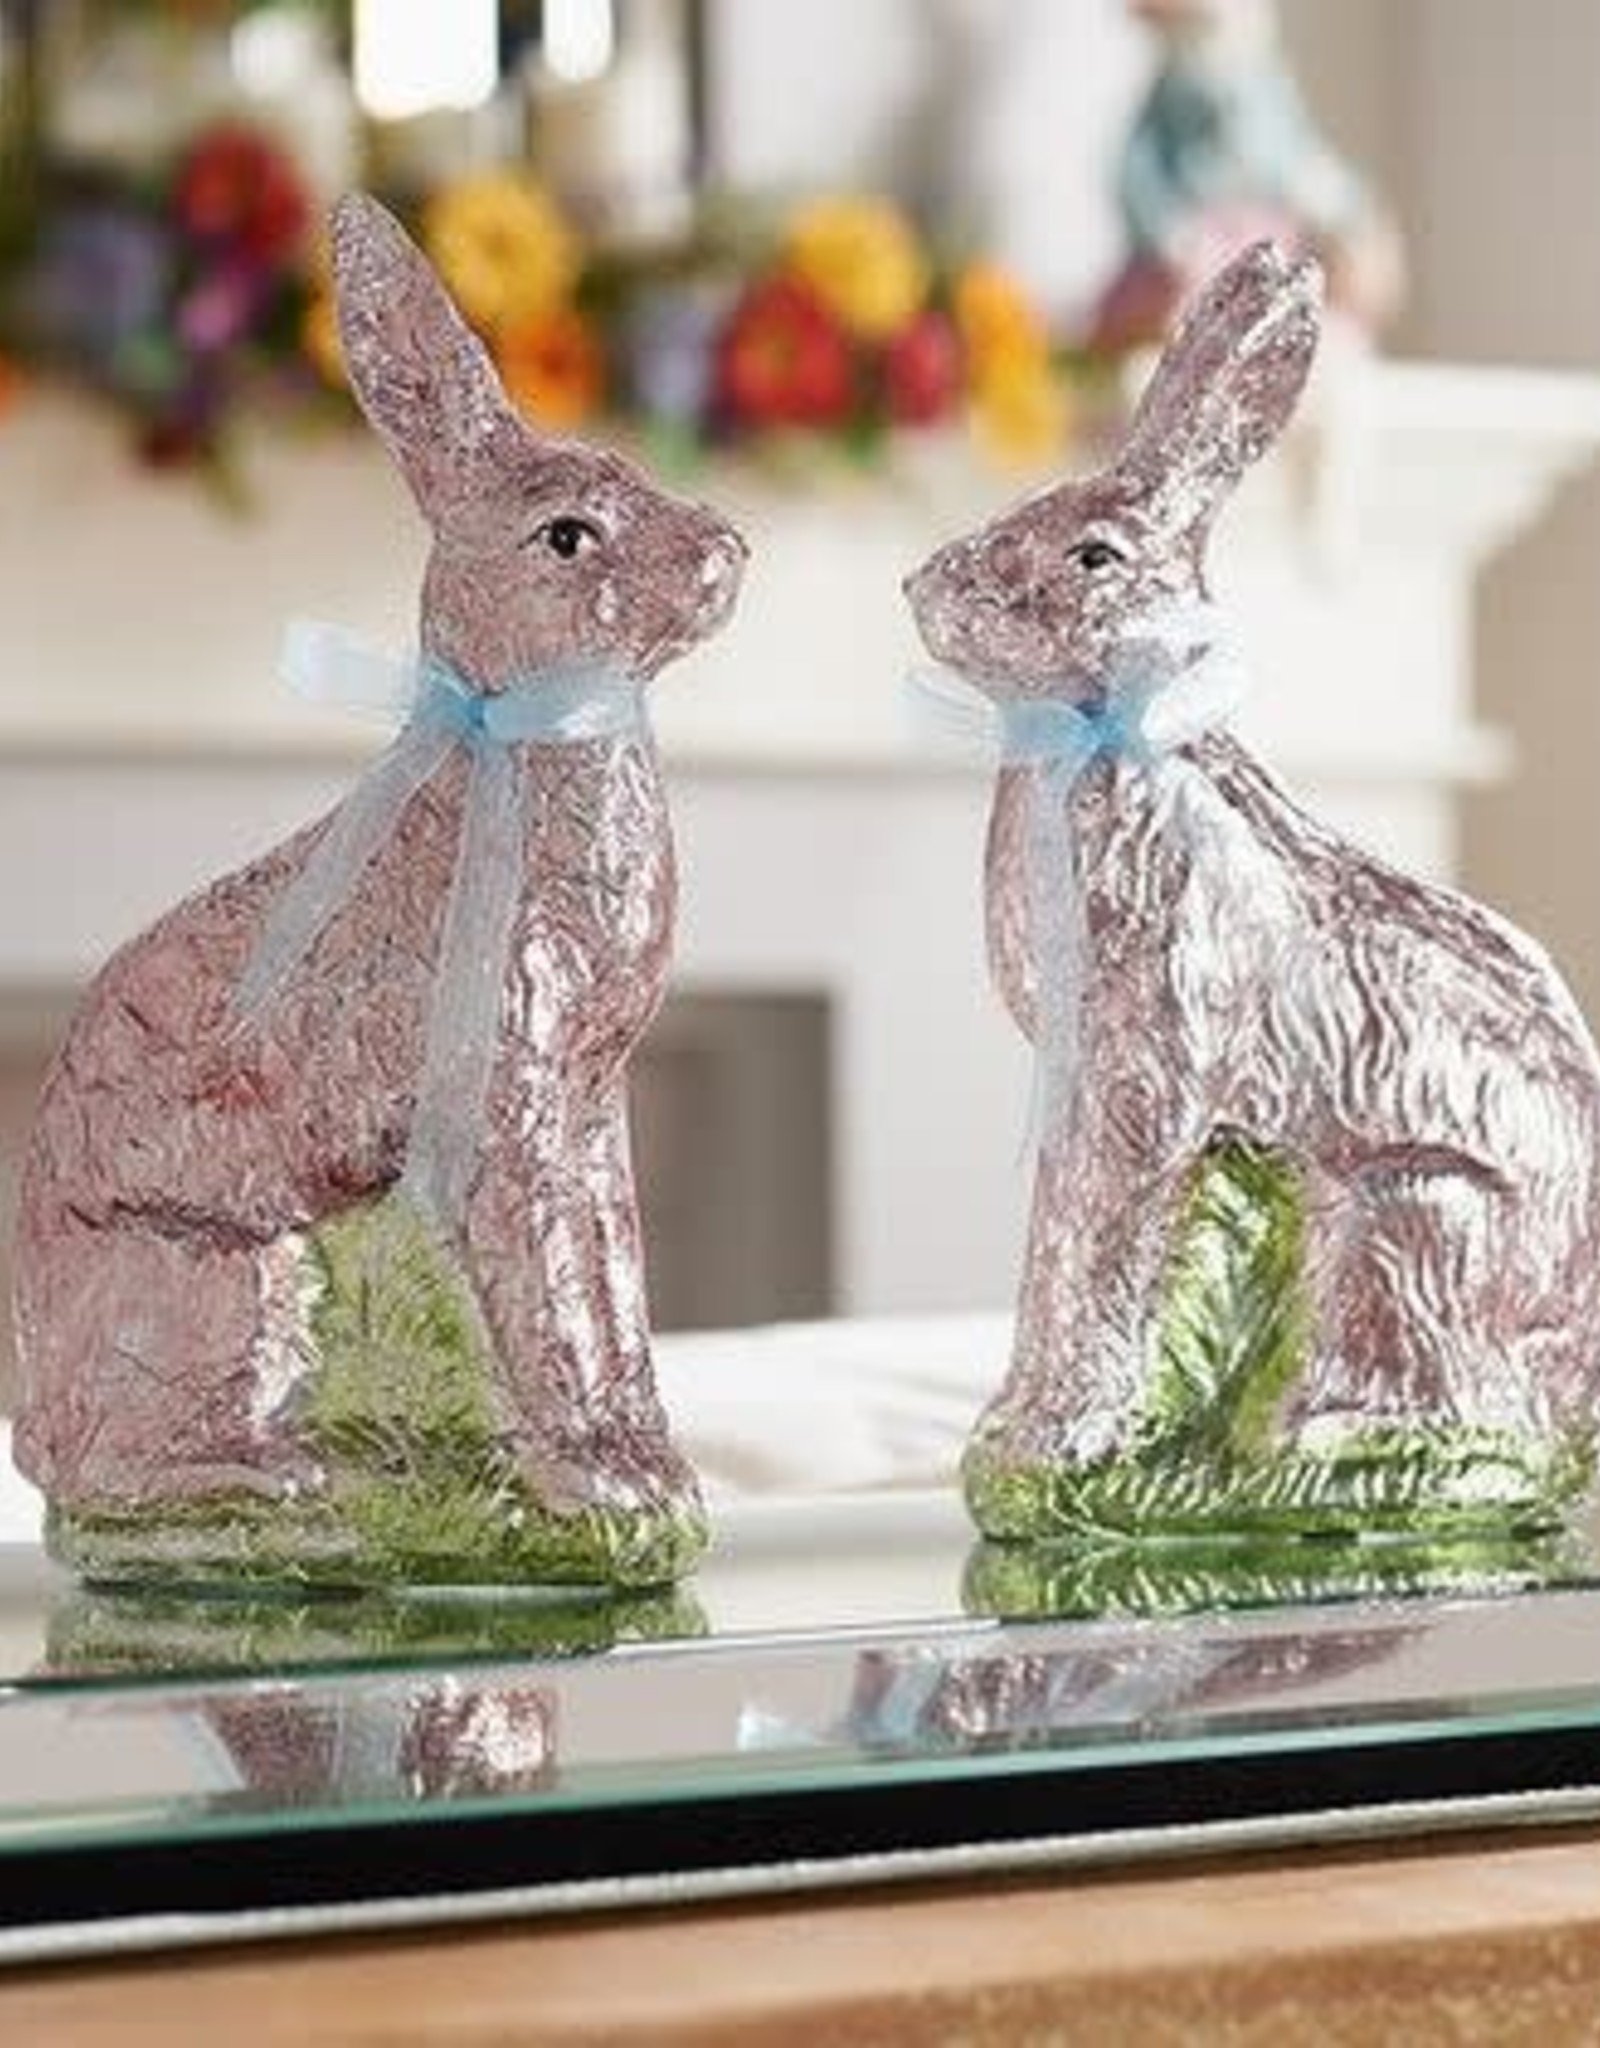 Set of (2) 9" Foil Wrapped Bunnies by Valerie